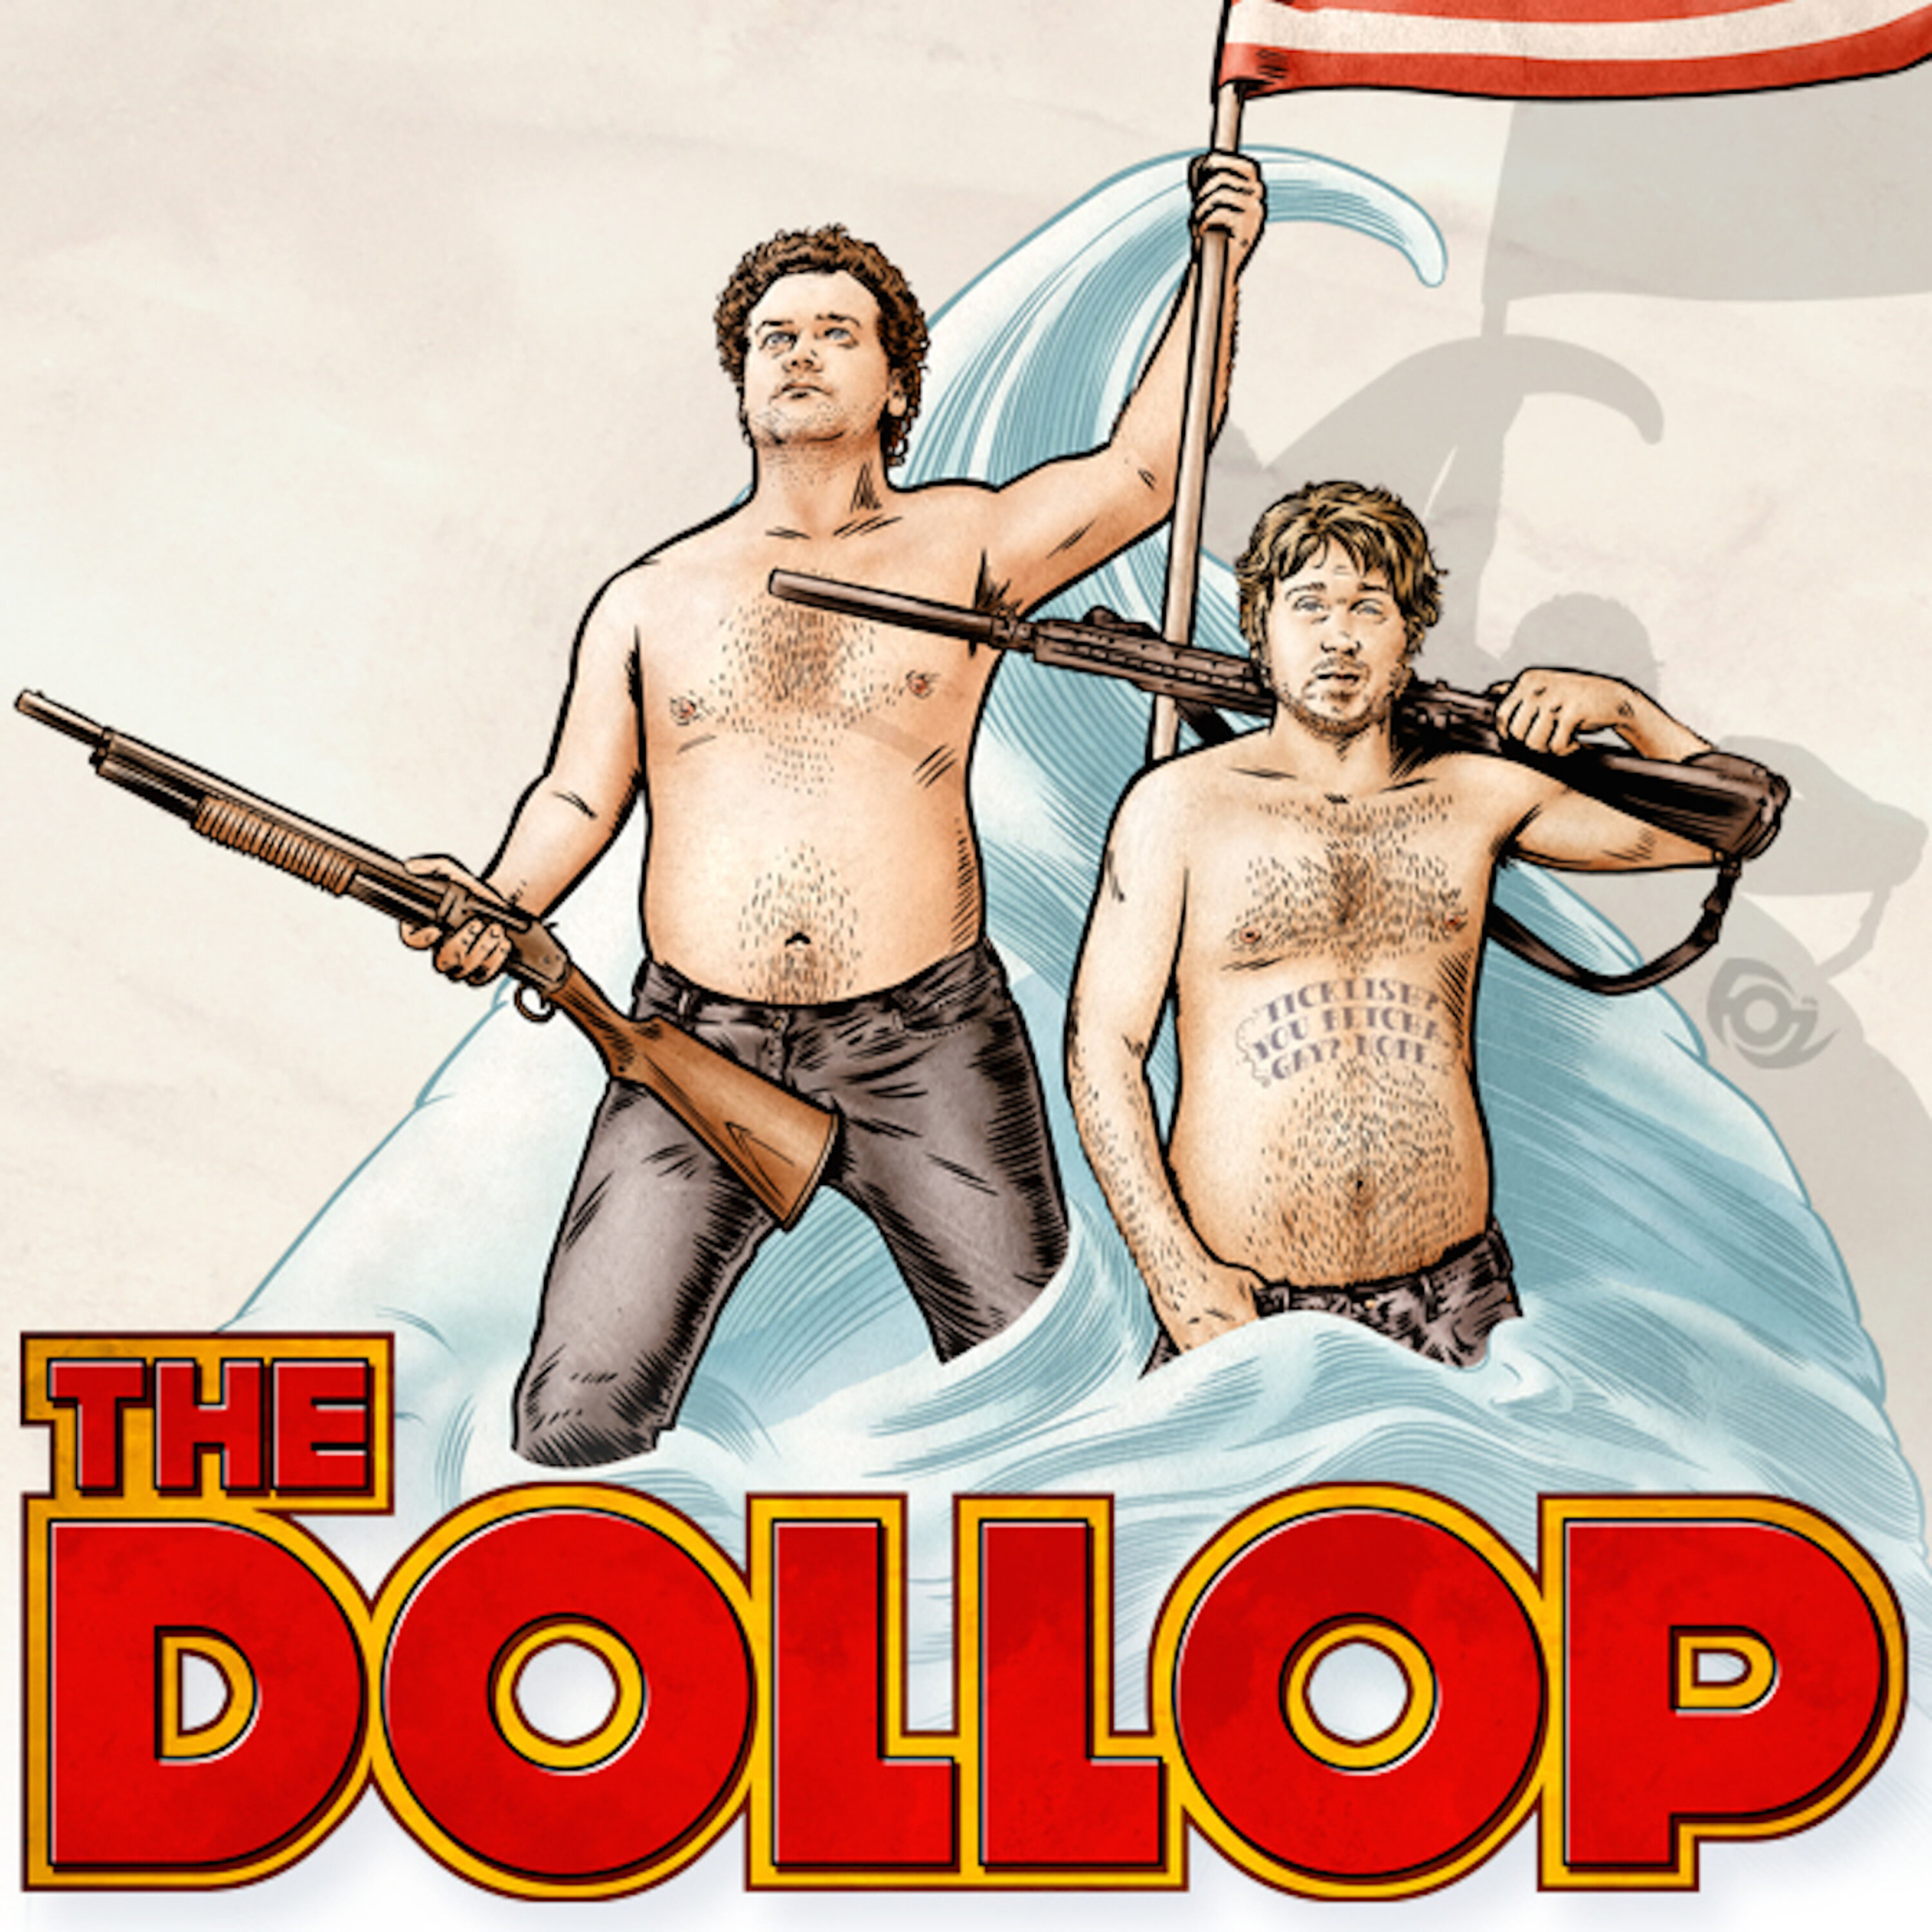 The Dollop with Dave Anthony and Gareth Reynolds podcast